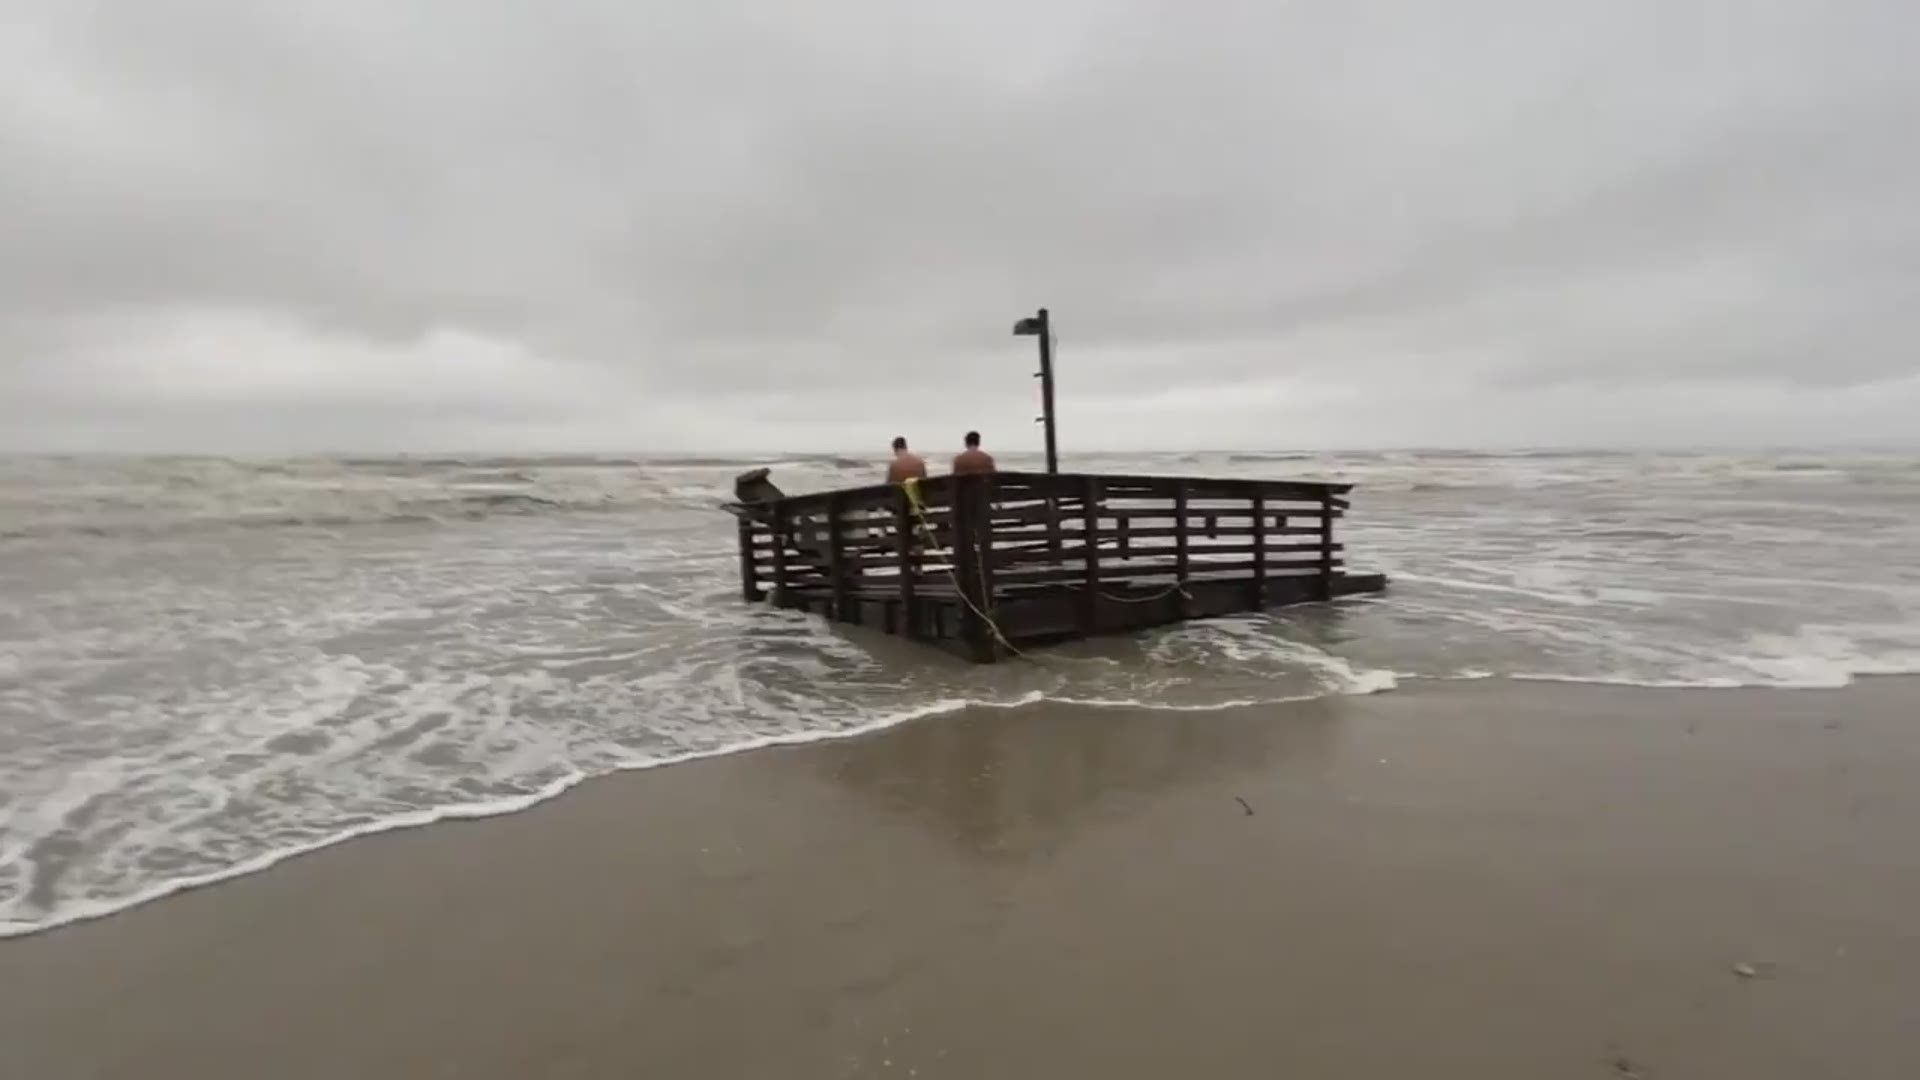 On a live stream, thousands of viewers watched the waves pummel the pier until this section of it washed away.